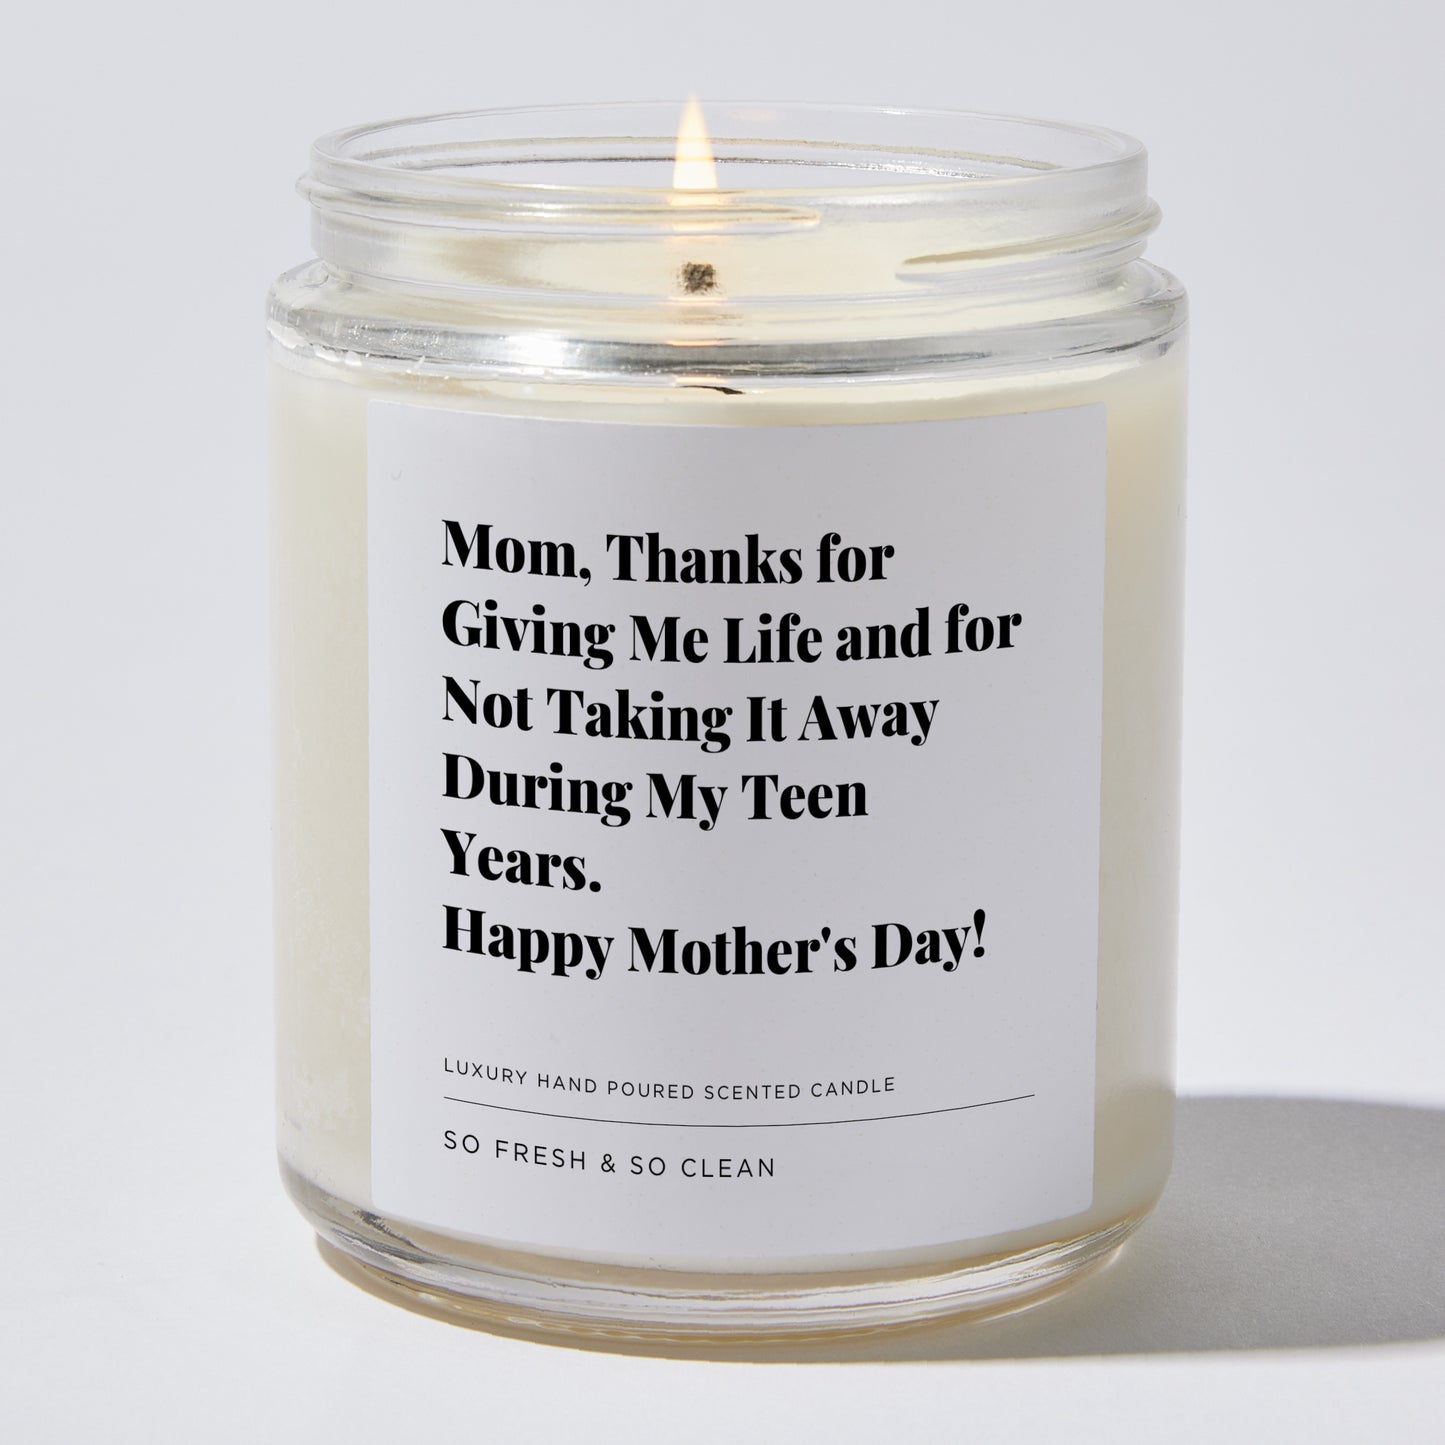 Gift for Mom - Mom, Thanks for giving me life and for not taking it away during my teen years. Happy Mother's Day! - Candle